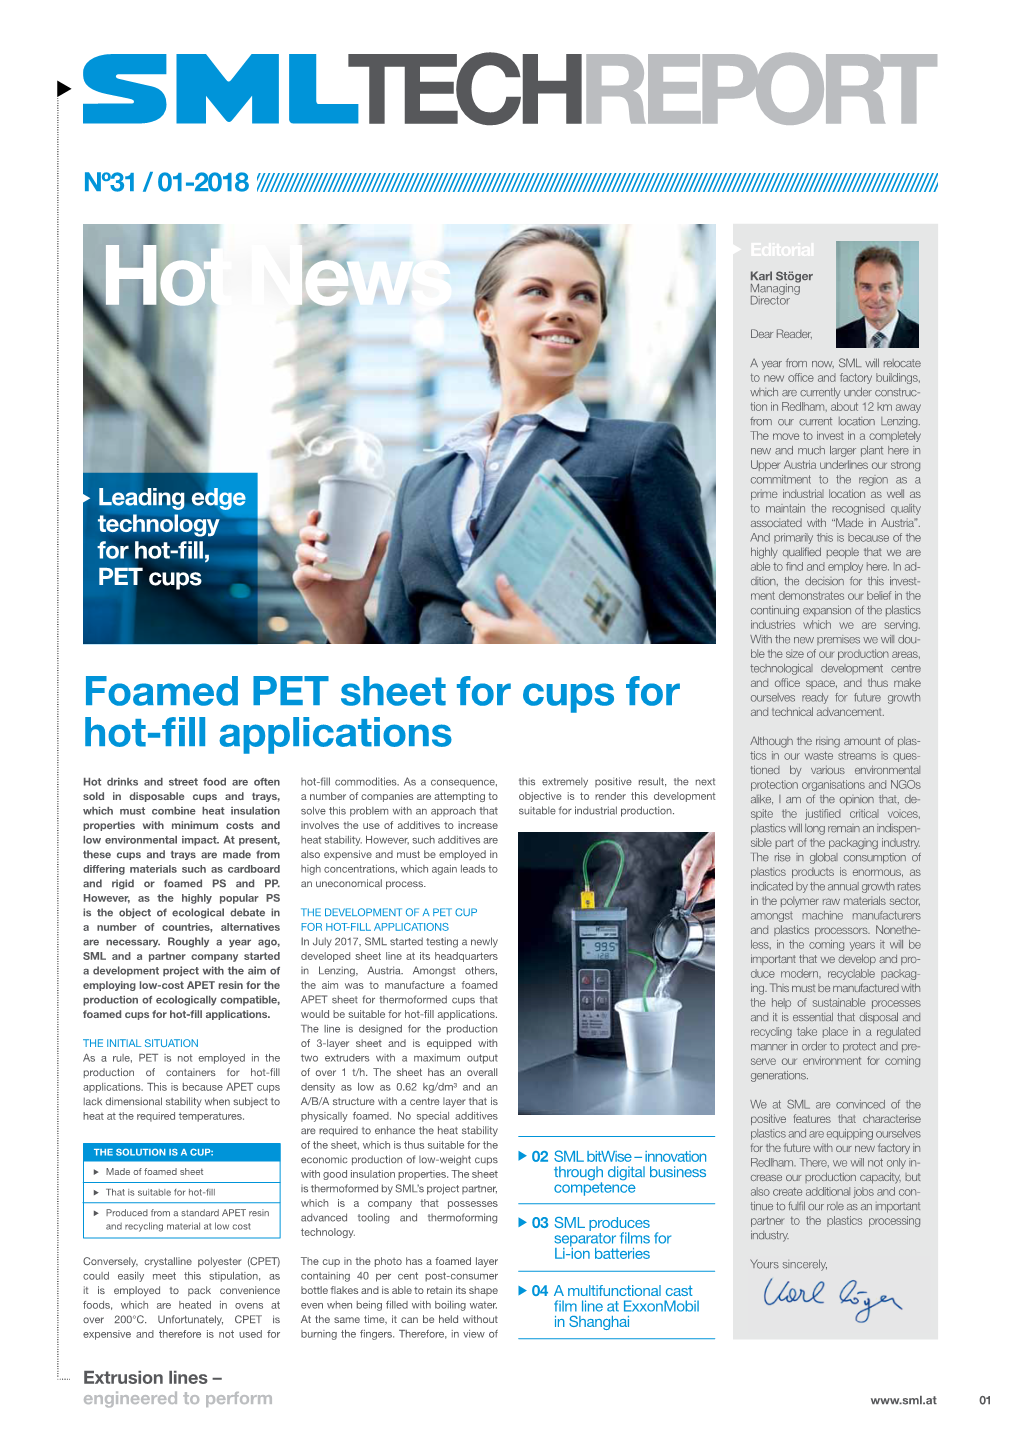 Foamed PET Sheet for Cups for Hot-Fill Applications